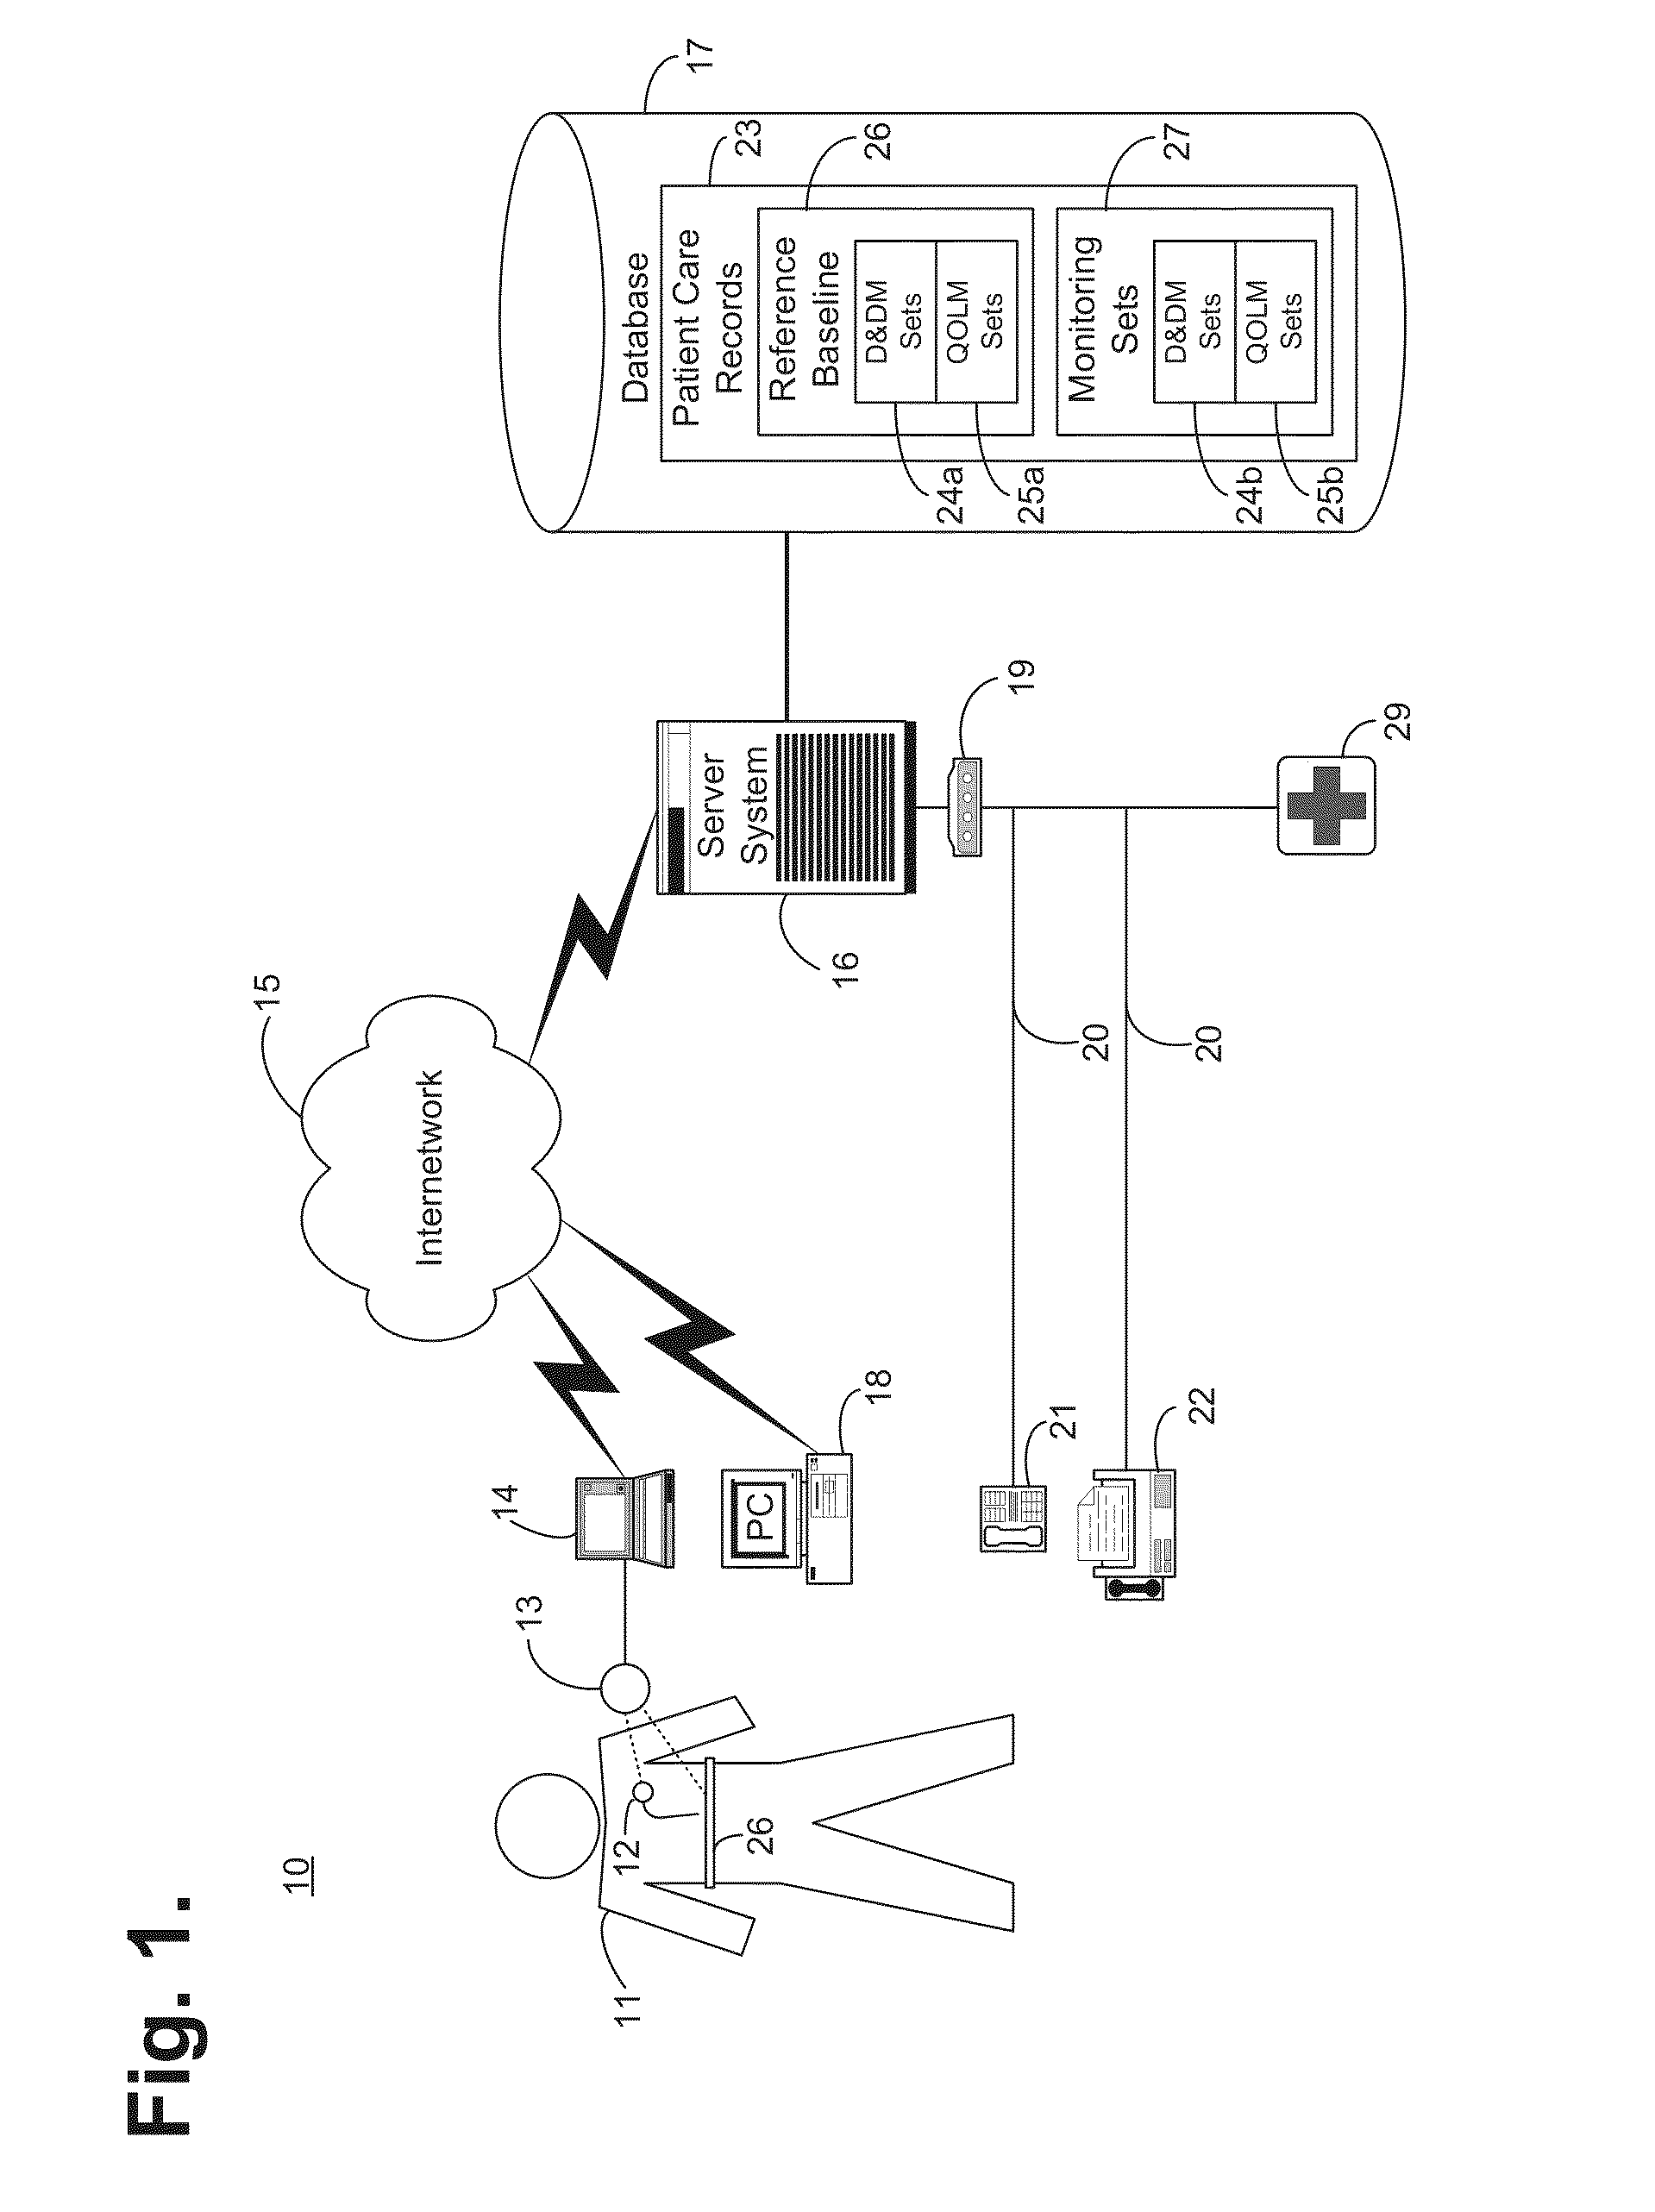 System and method for prioritizing medical conditions